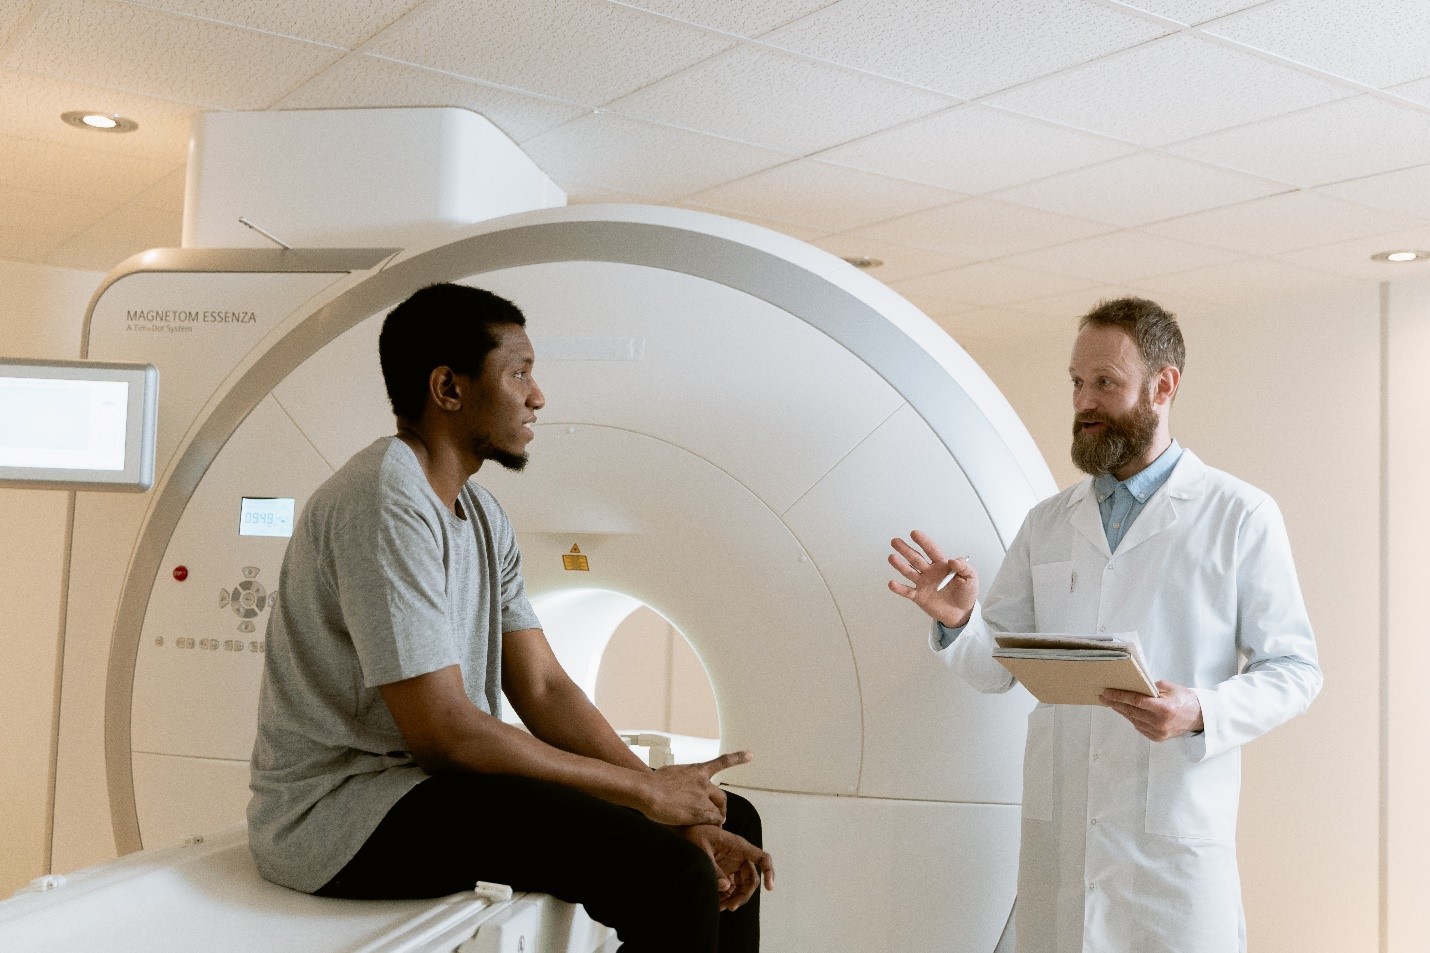 The impact of anxiety and claustrophobia on MRI patients and technicians – and how an audio system can help